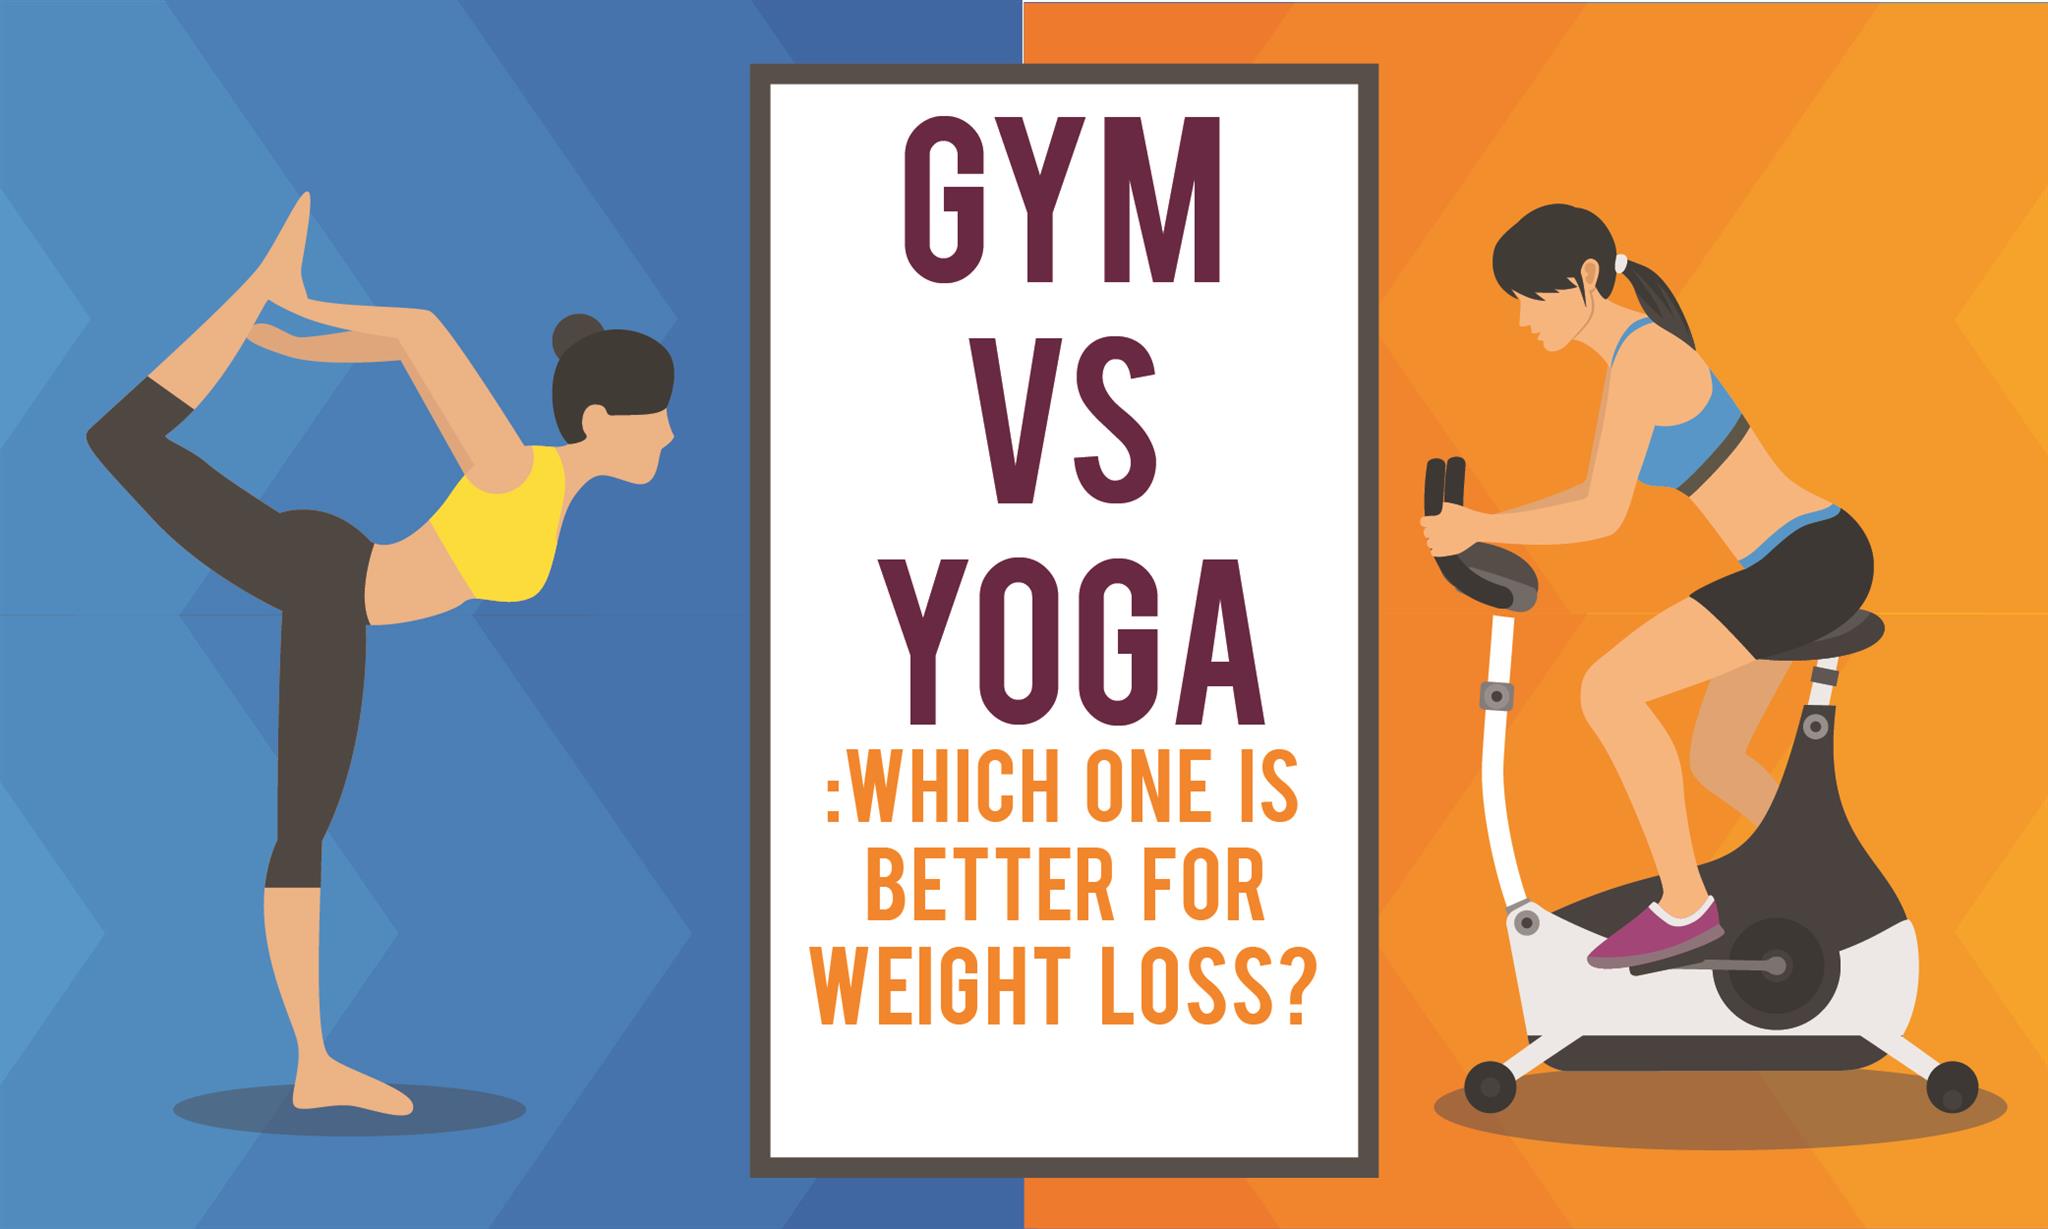 https://www.medylife.com/blog/wp-content/uploads/2018/06/Gym-vs-Yoga-Which-One-is-Better-for-Weight-Loss-01-01.jpg